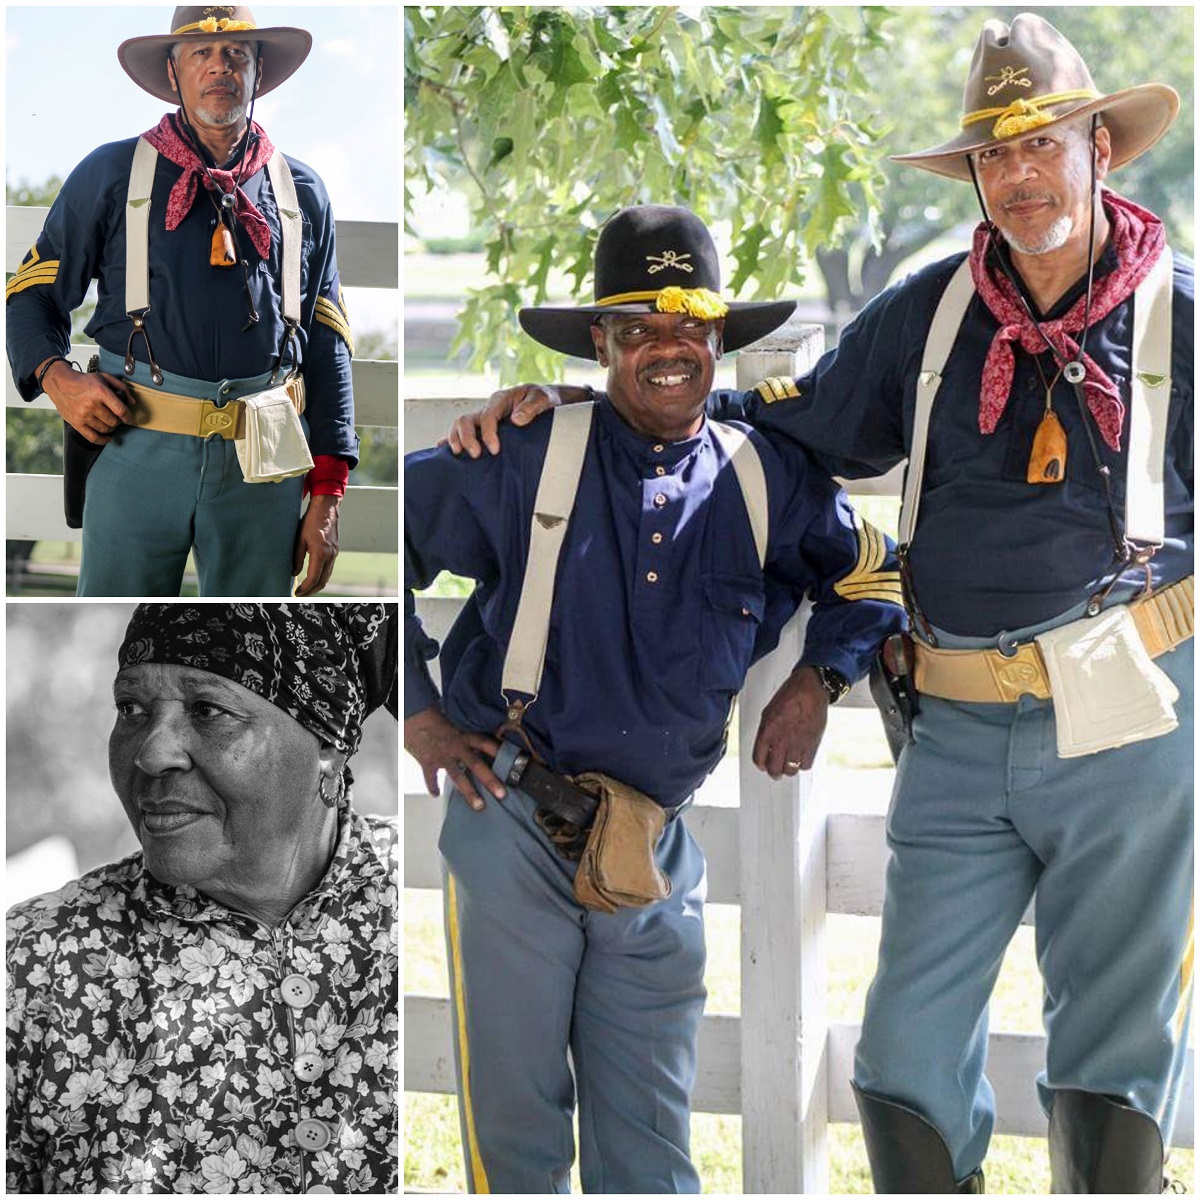 Buffalo Soldiers, Alexander/Madison Chapter of the Kansas City Area